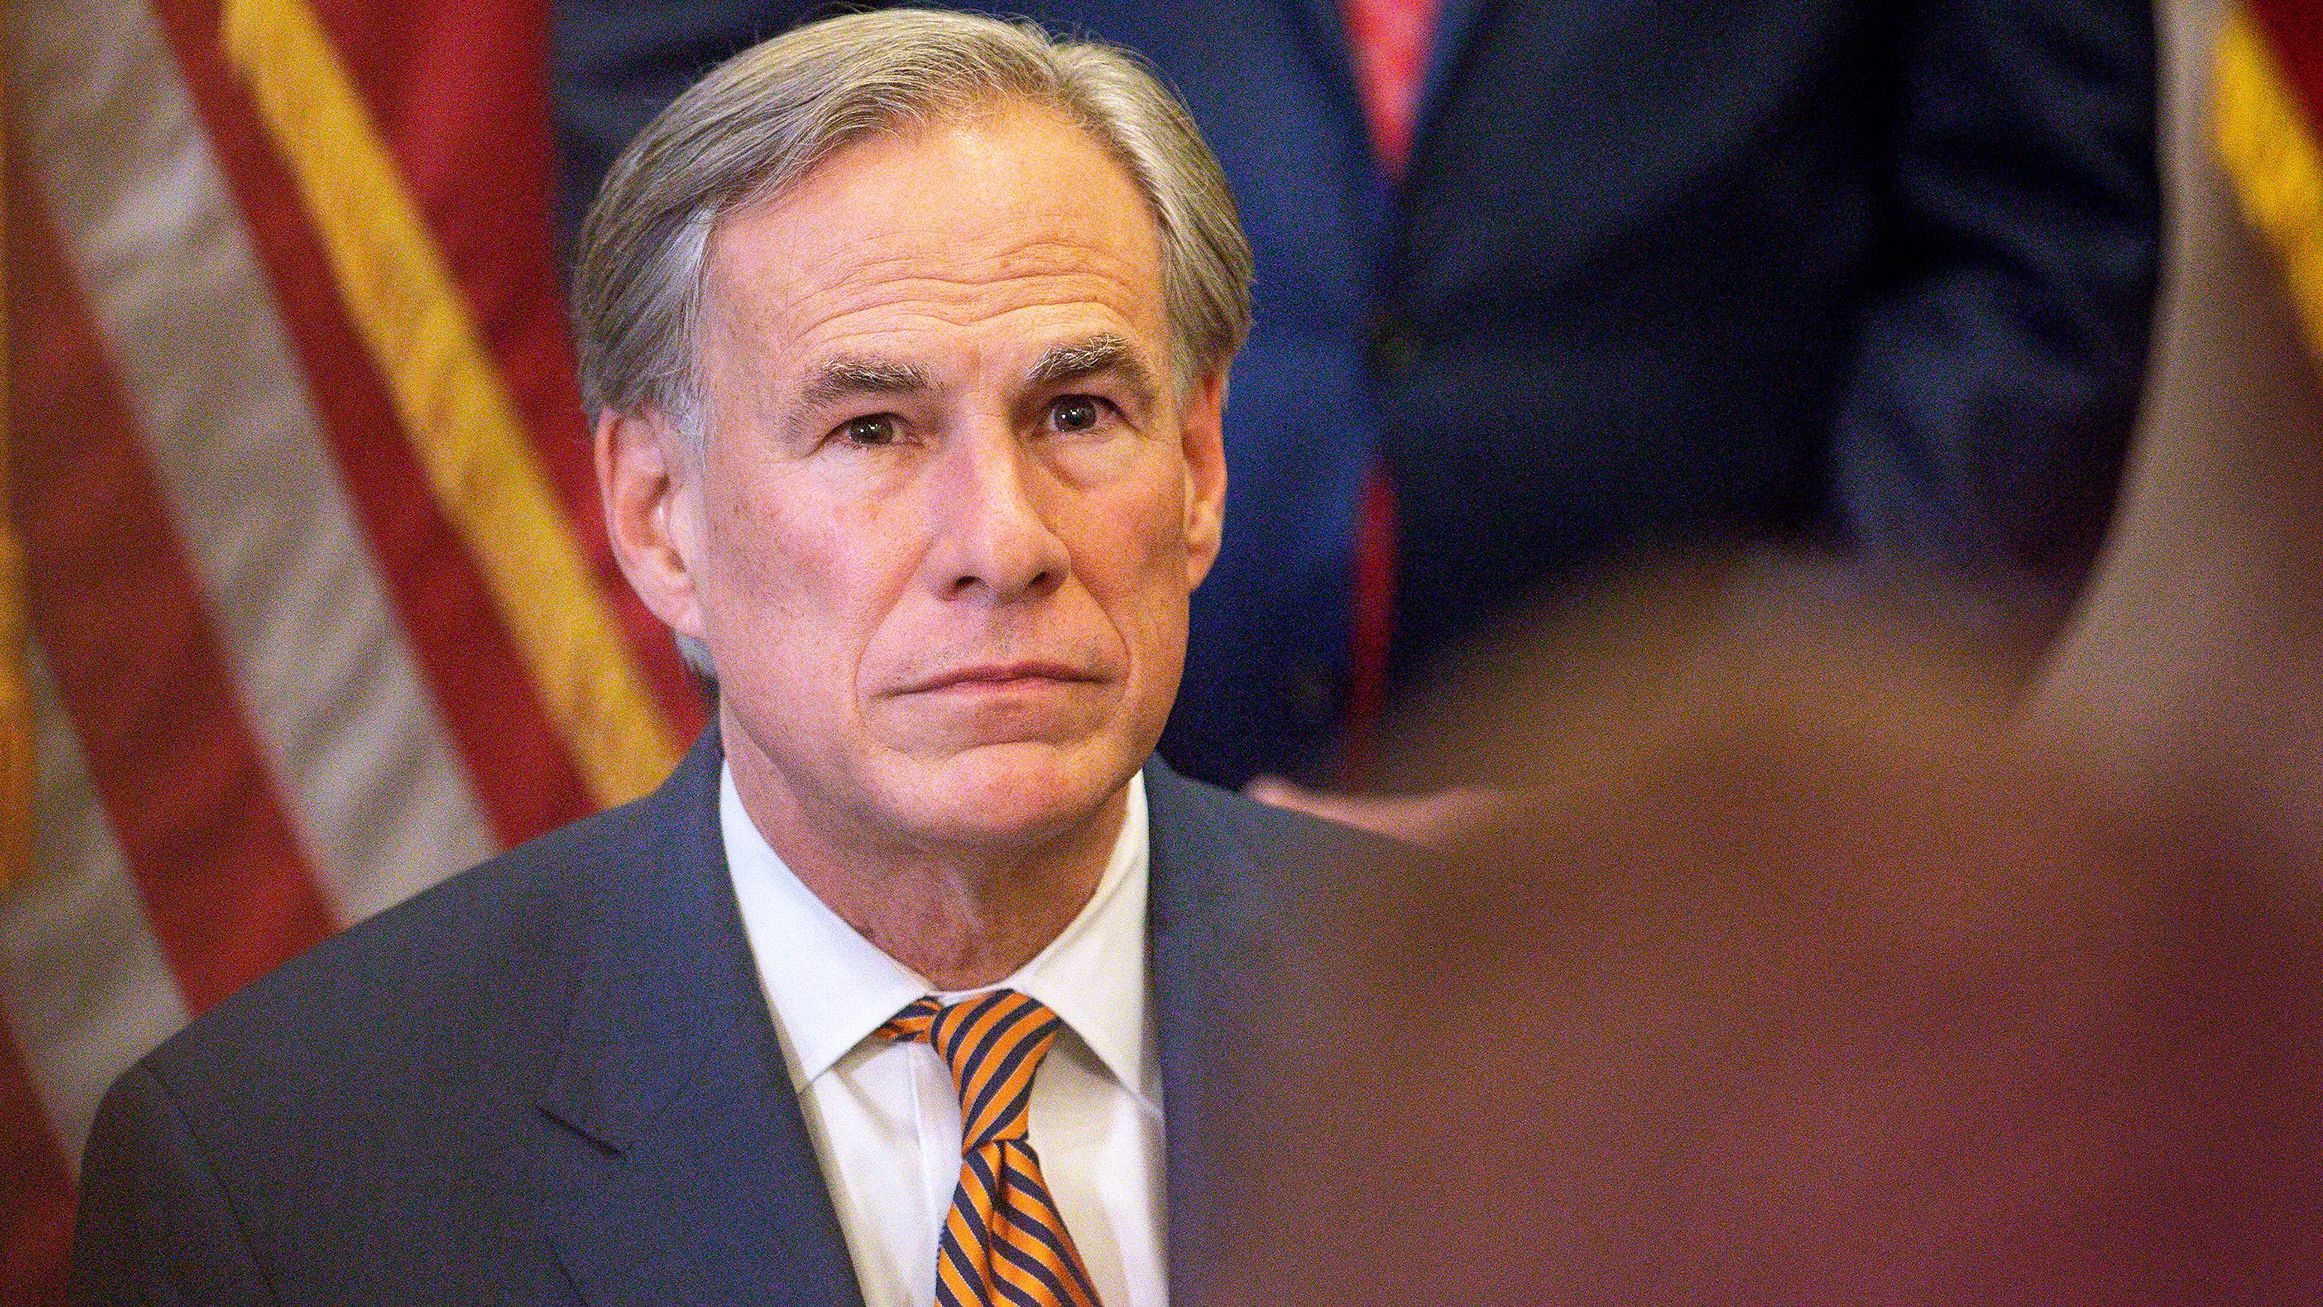 Texas Gov. Greg Abbott says he wants to protect children from being exposed to pornography when they visit school libraries in the state.